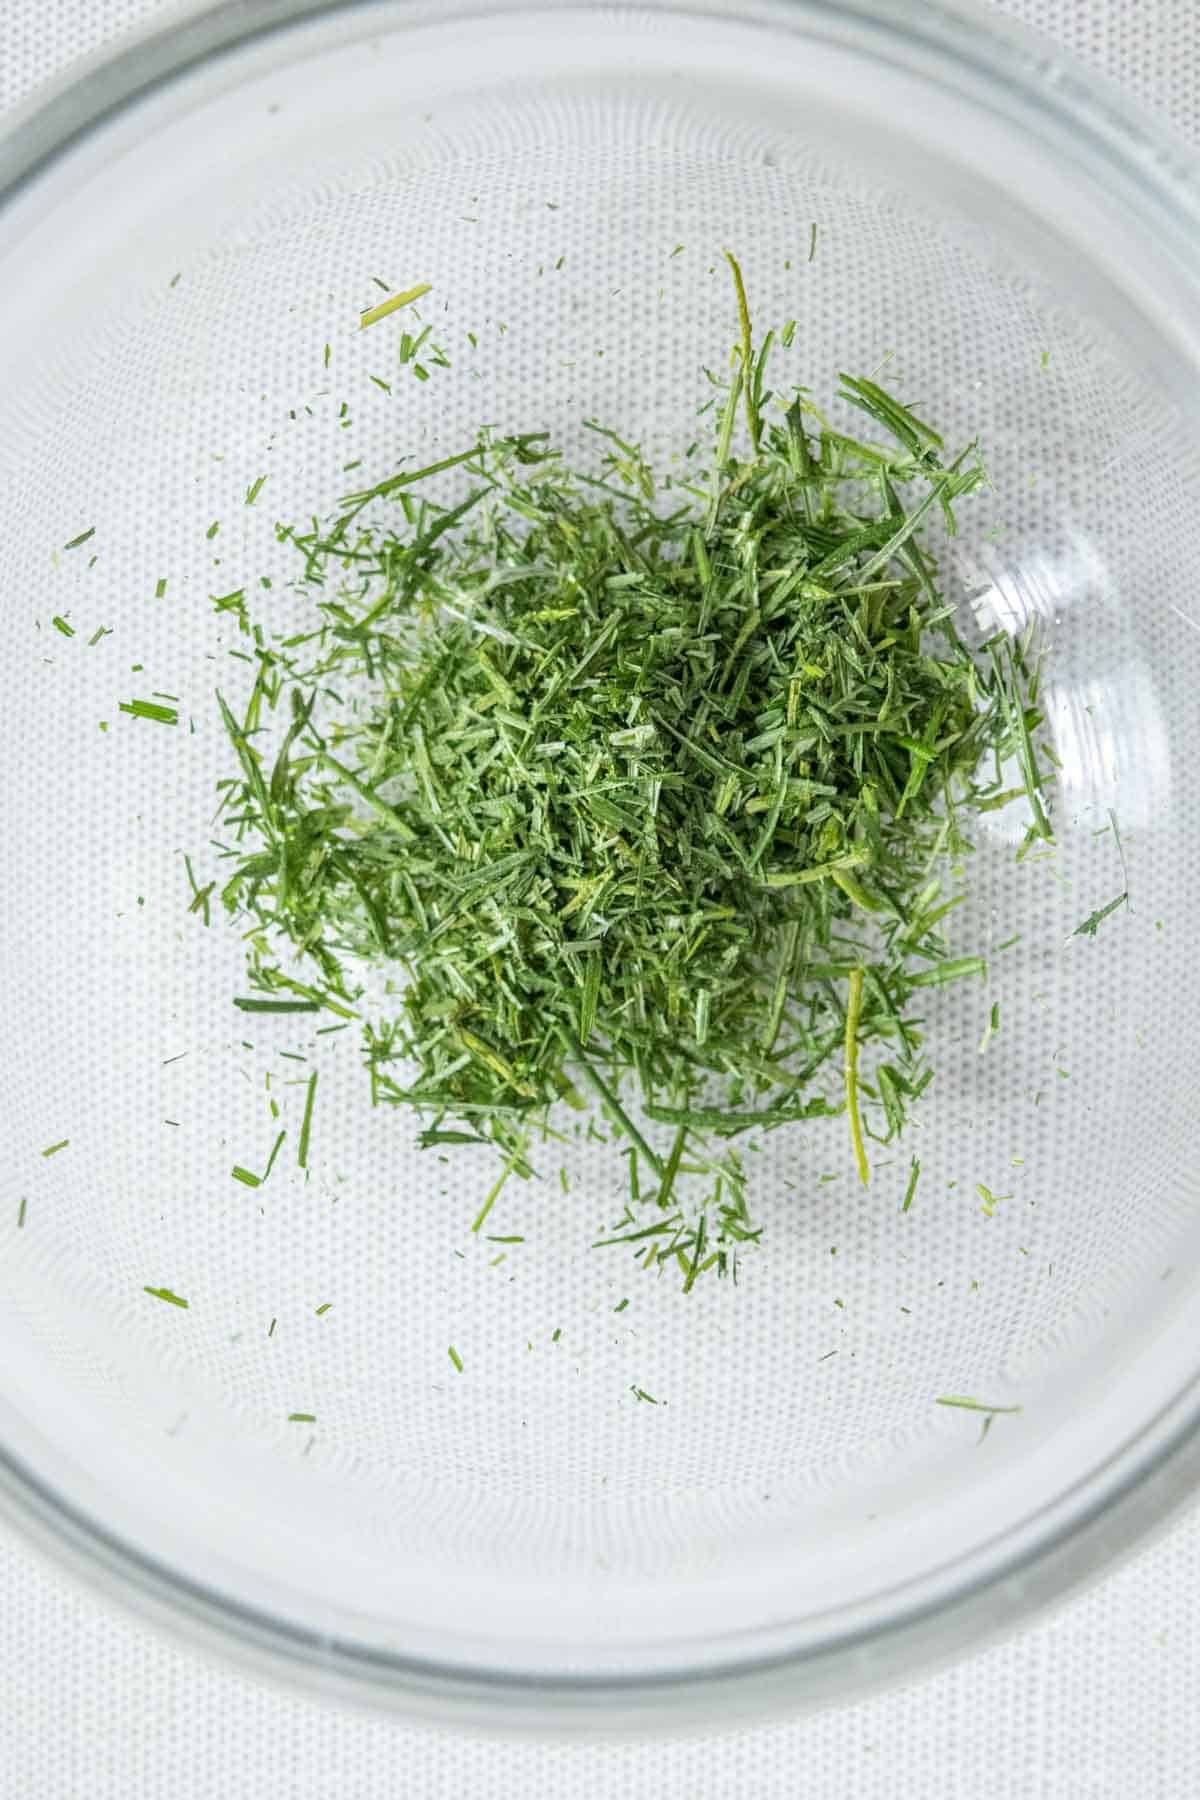 Dried chive pieces in a bowl.